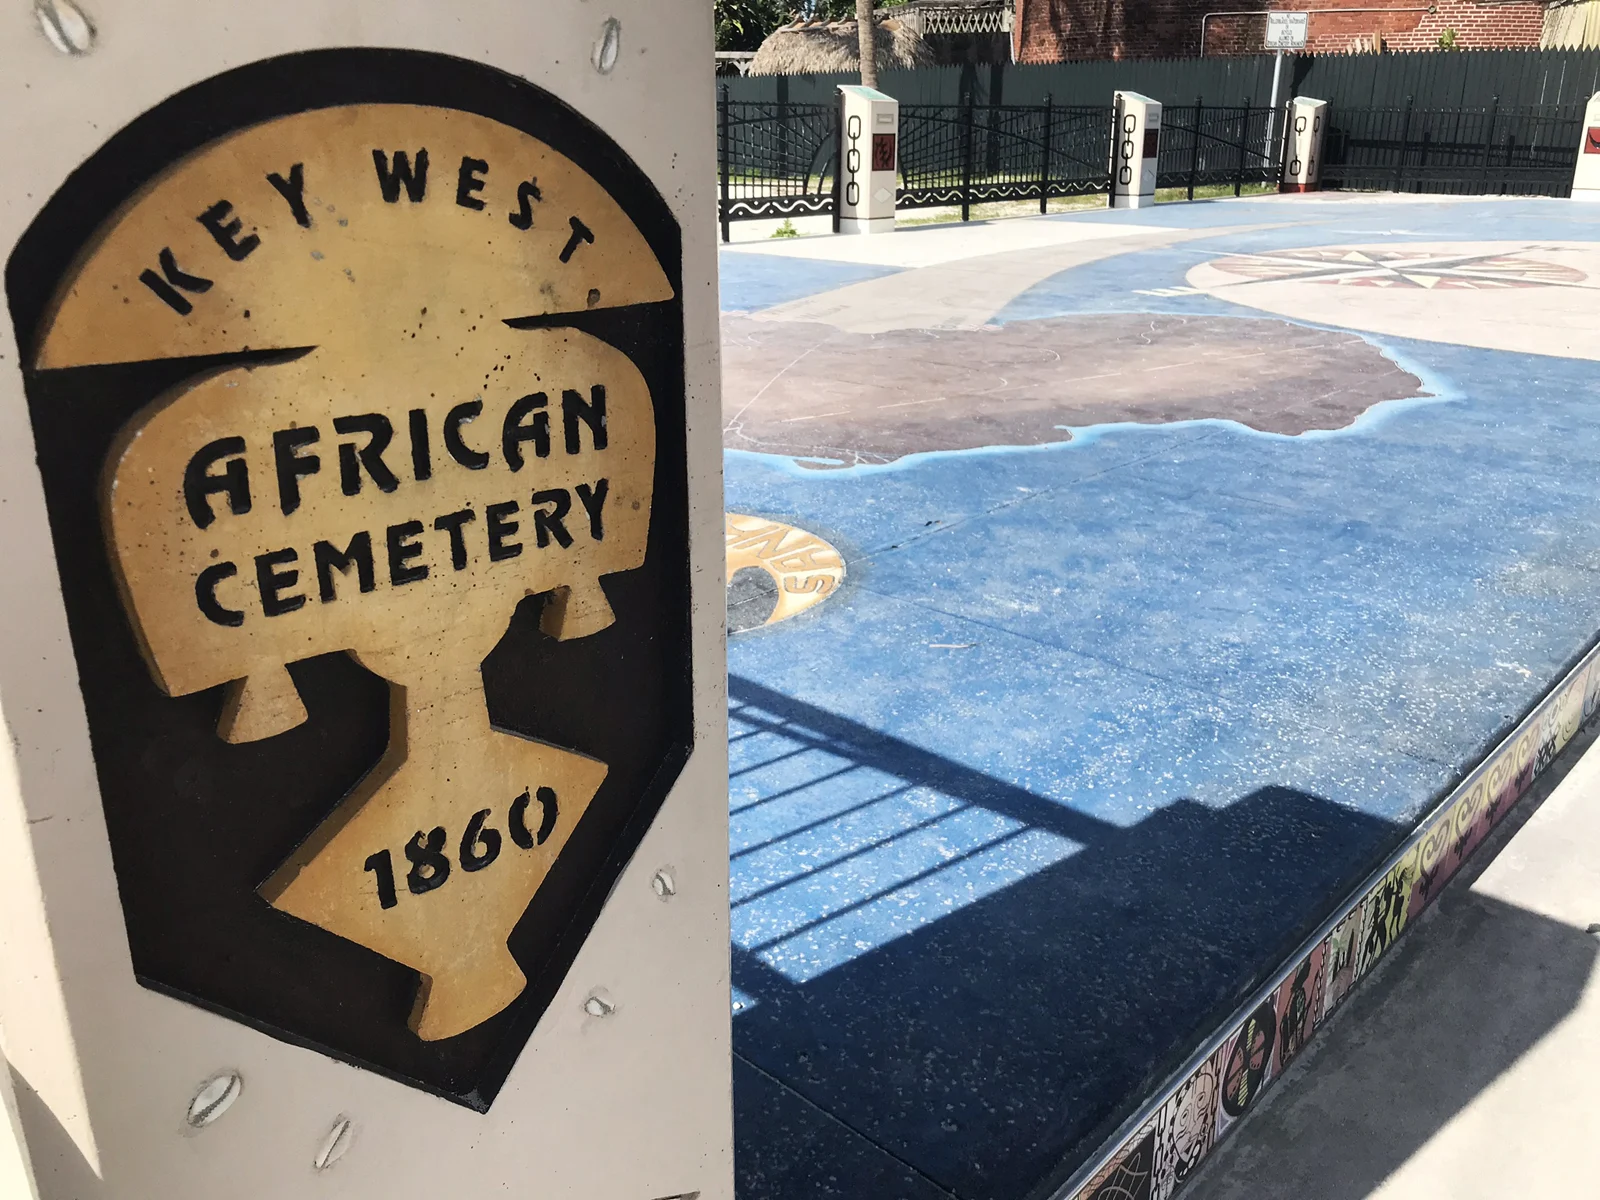 Key West African cemetery: At Higgs Beach in Key West, a memorial marks the site where African slaves were buried after they were rescued from slave ships in 1860. The blue surface in the background is a map of Africa and America, showing the passageway ships sailed. (Photo: Bonnie Gross)